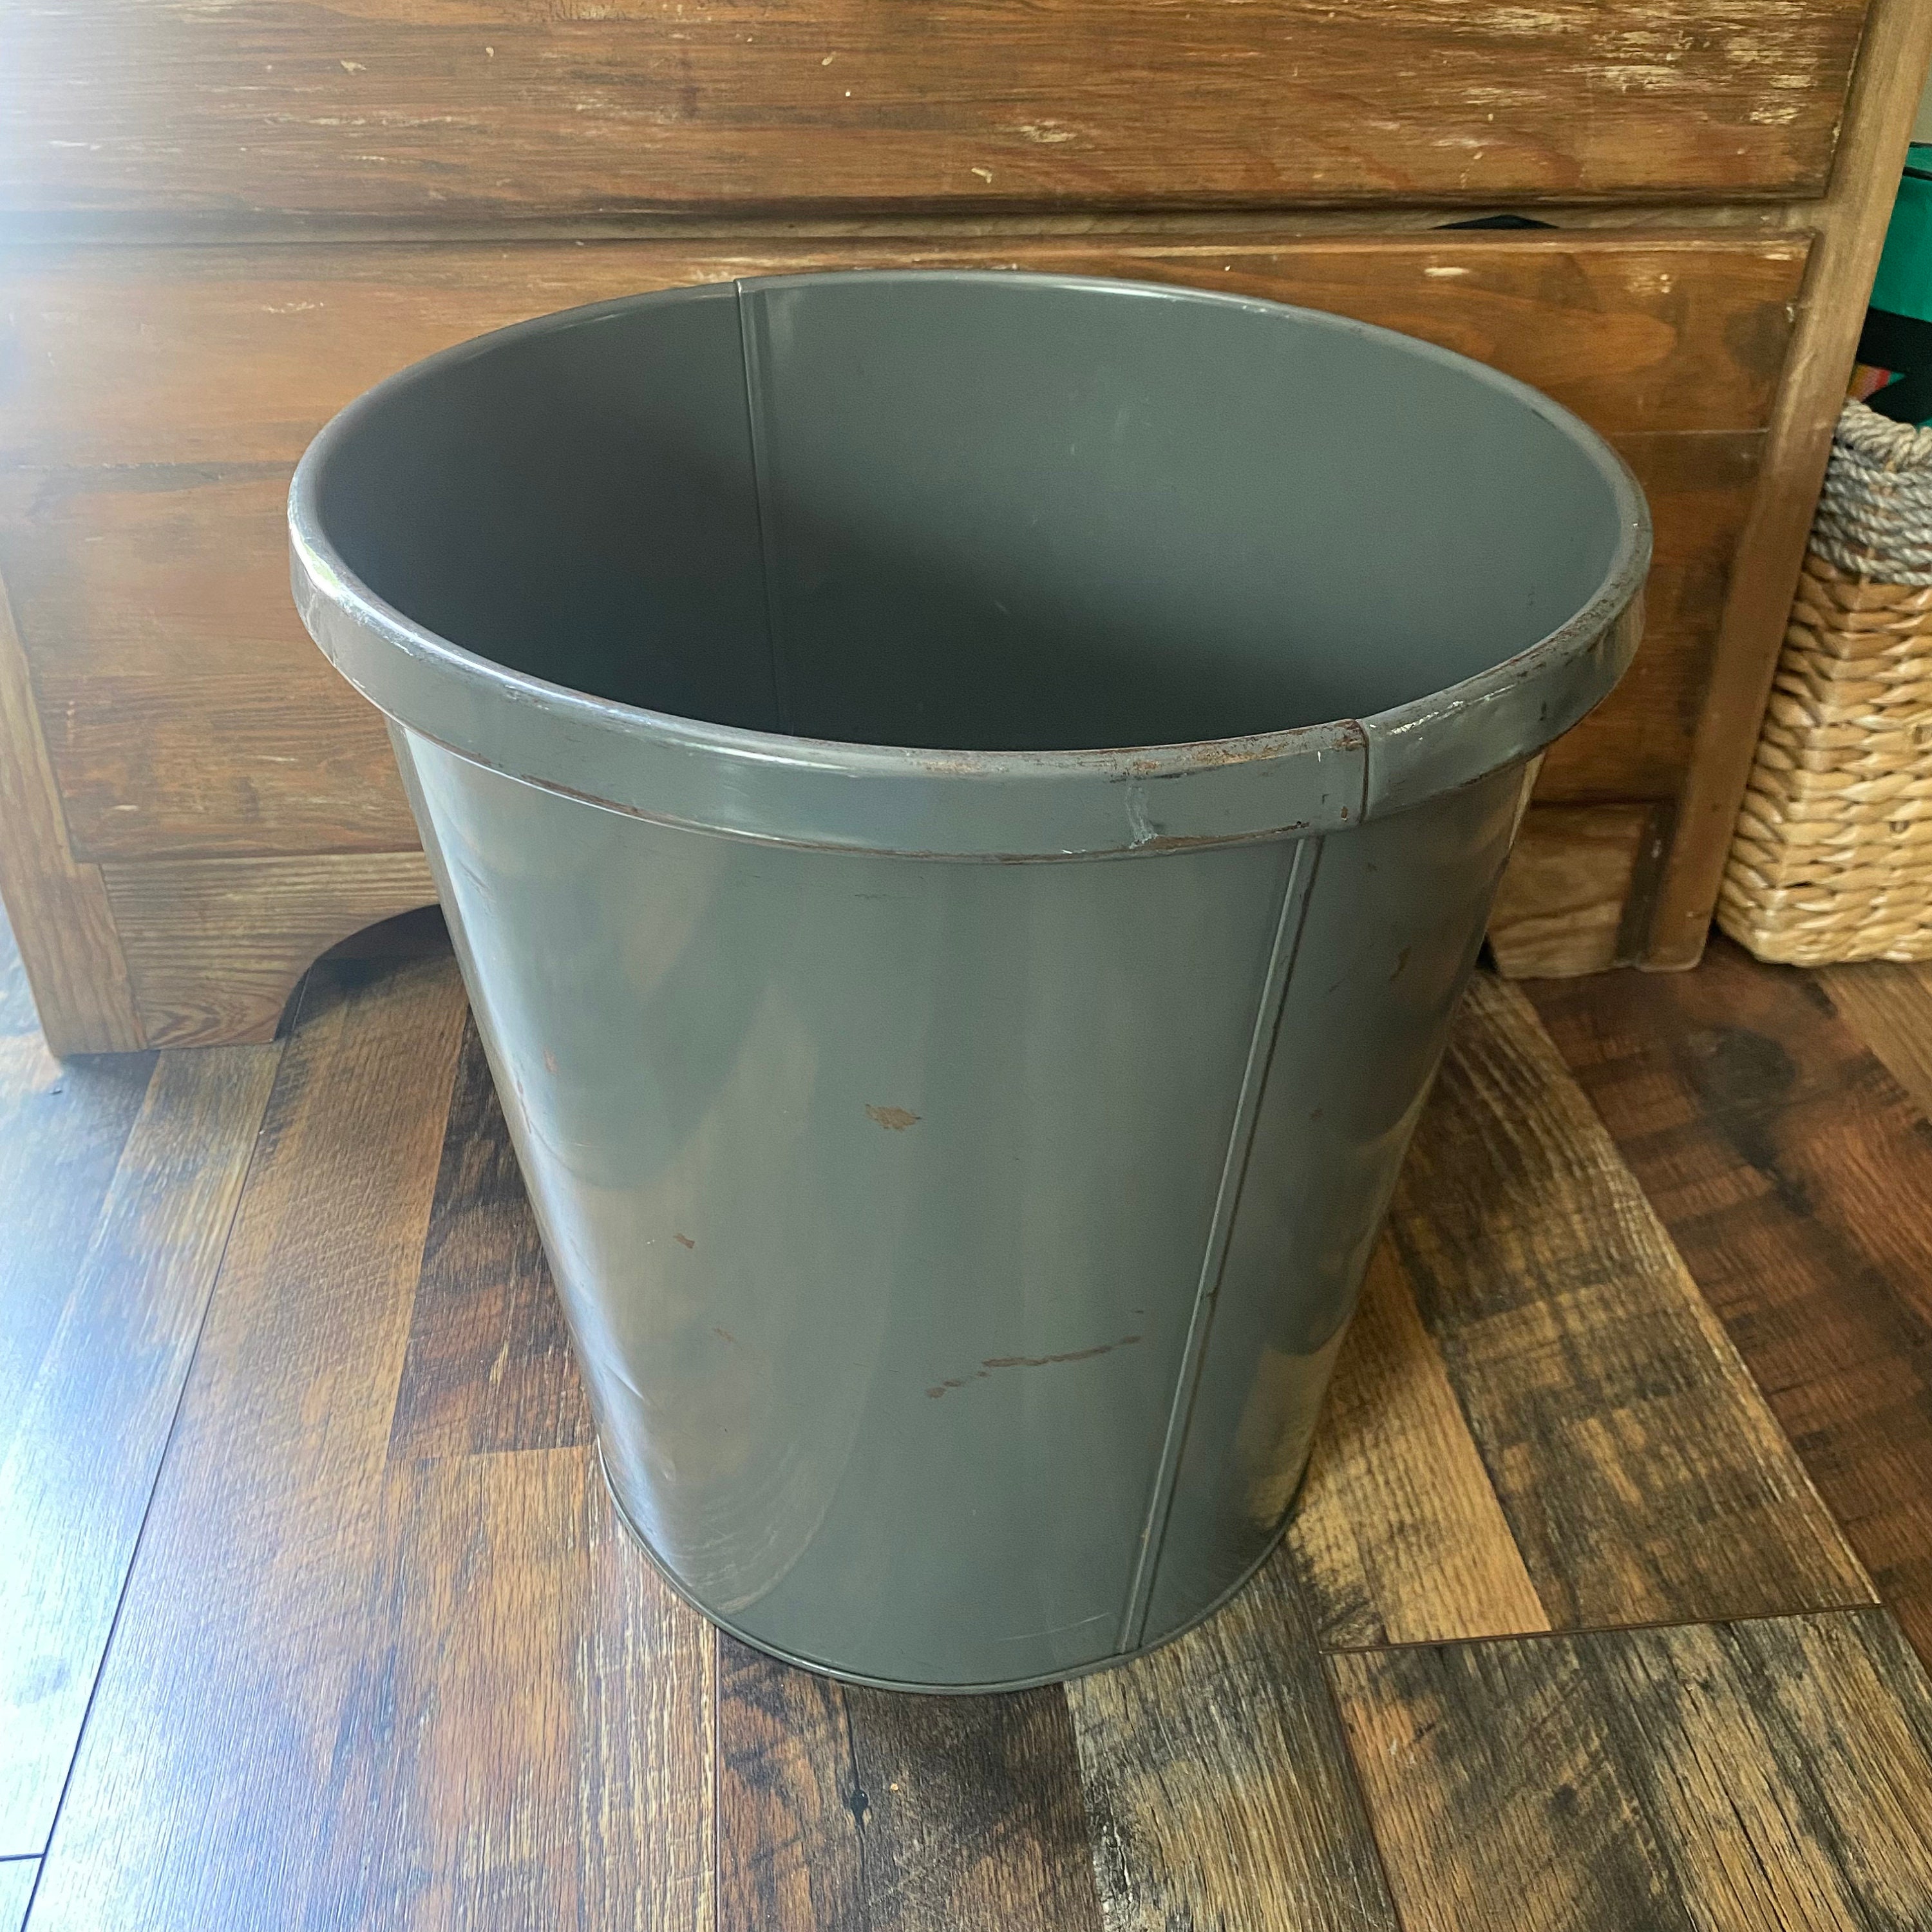 Small Trash Can with Lid Large detailed vintage color political